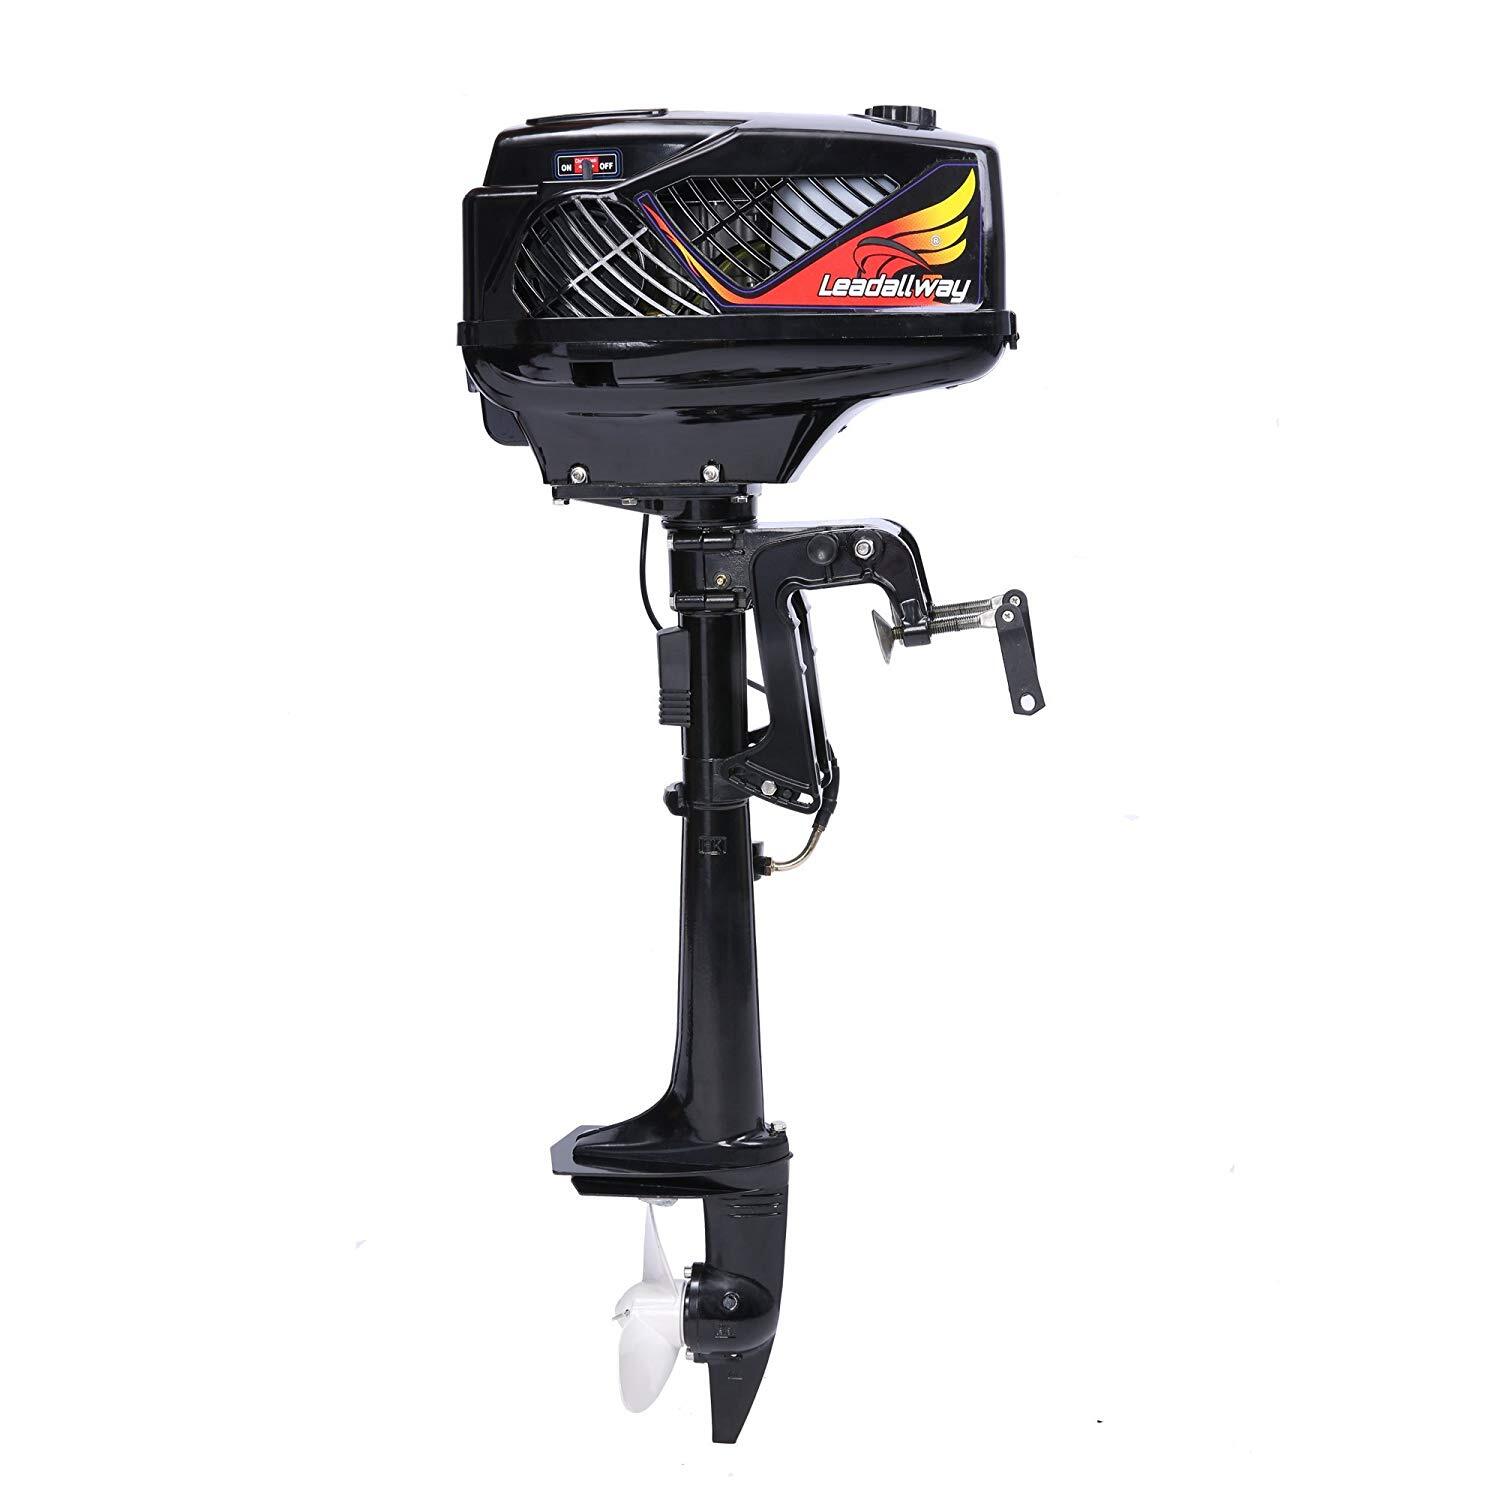 3.6 HP Outboard Motor Engine 2 Stroke Water Cooling CDI System Boat Motor US New 